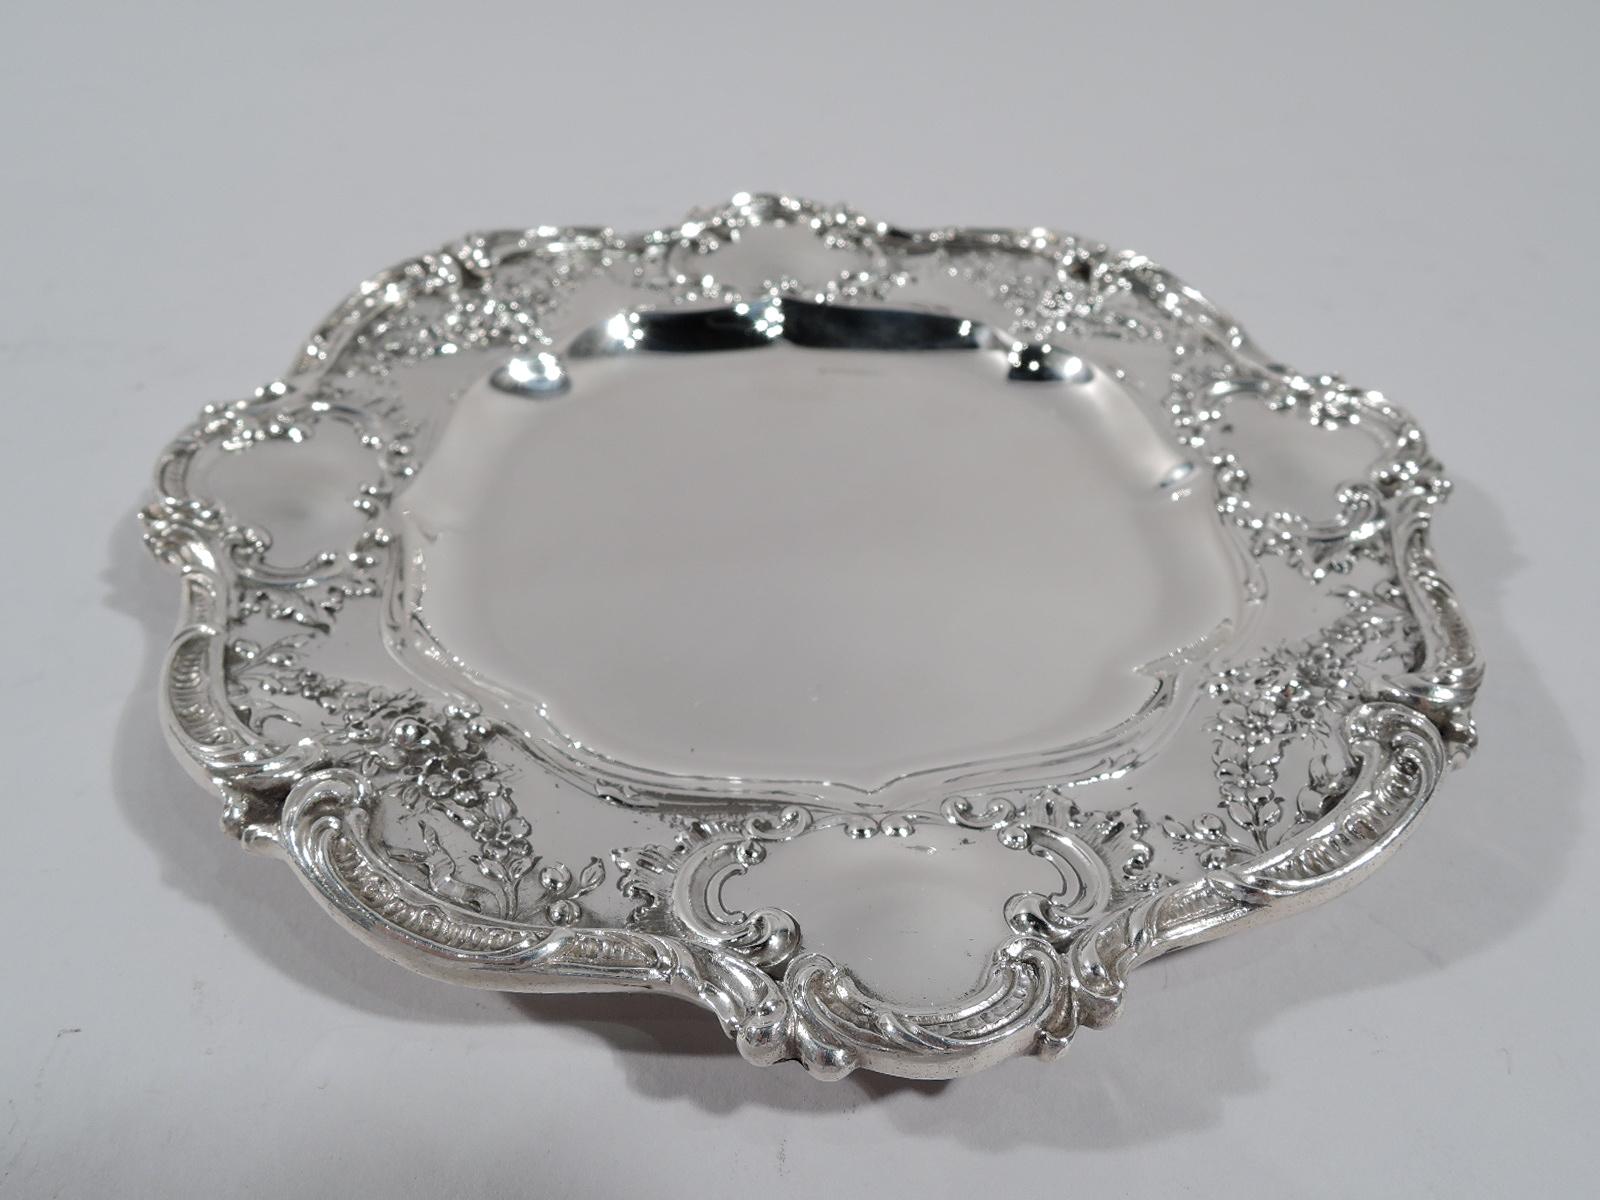 American Set of 14 Gorham Edwardian Rococo Sterling Silver Bread and Butter Plates